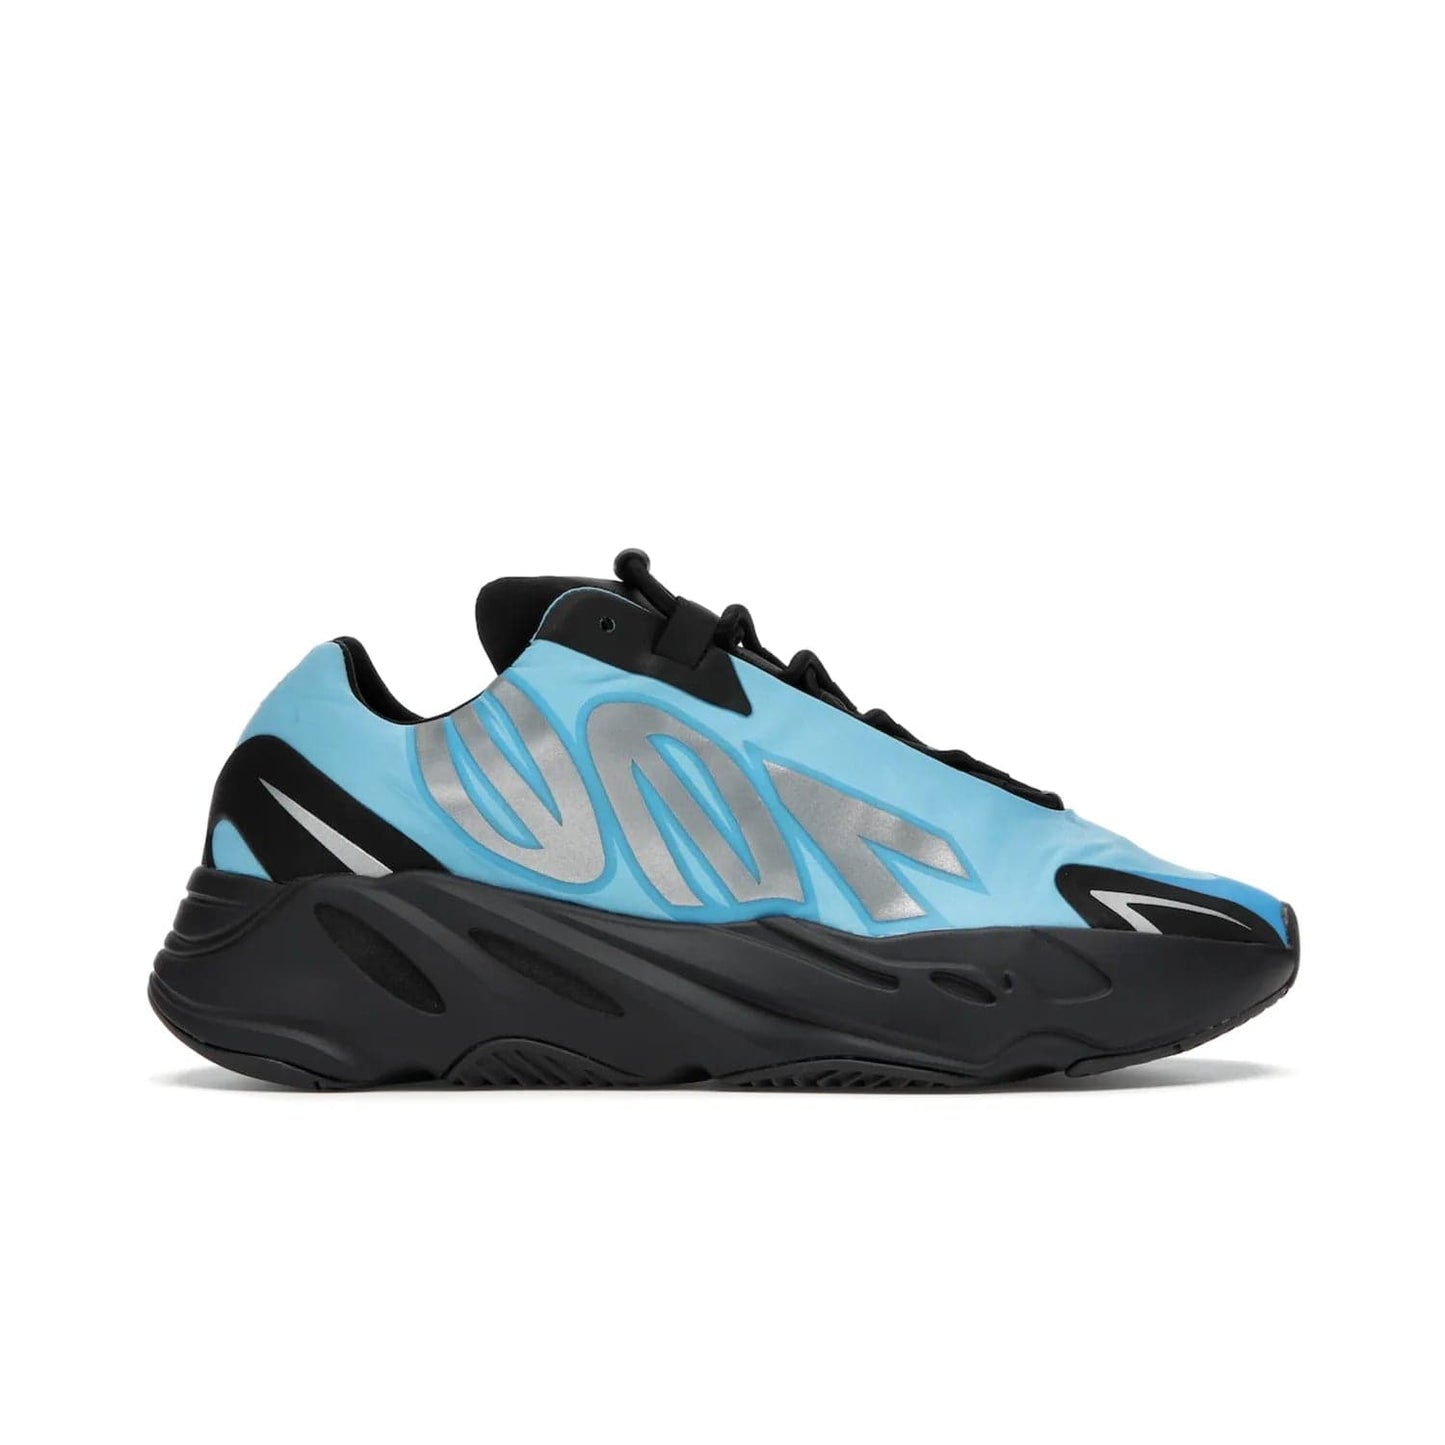 adidas Yeezy Boost 700 MNVN Bright Cyan - Image 1 - Only at www.BallersClubKickz.com - The adidas Yeezy Boost 700 MNVN features a Bright Cyan nylon upper with iconic "700" graphics and a sculptural black Boost sole for superior style and comfort. Step into legendary style and comfort in June 2021.